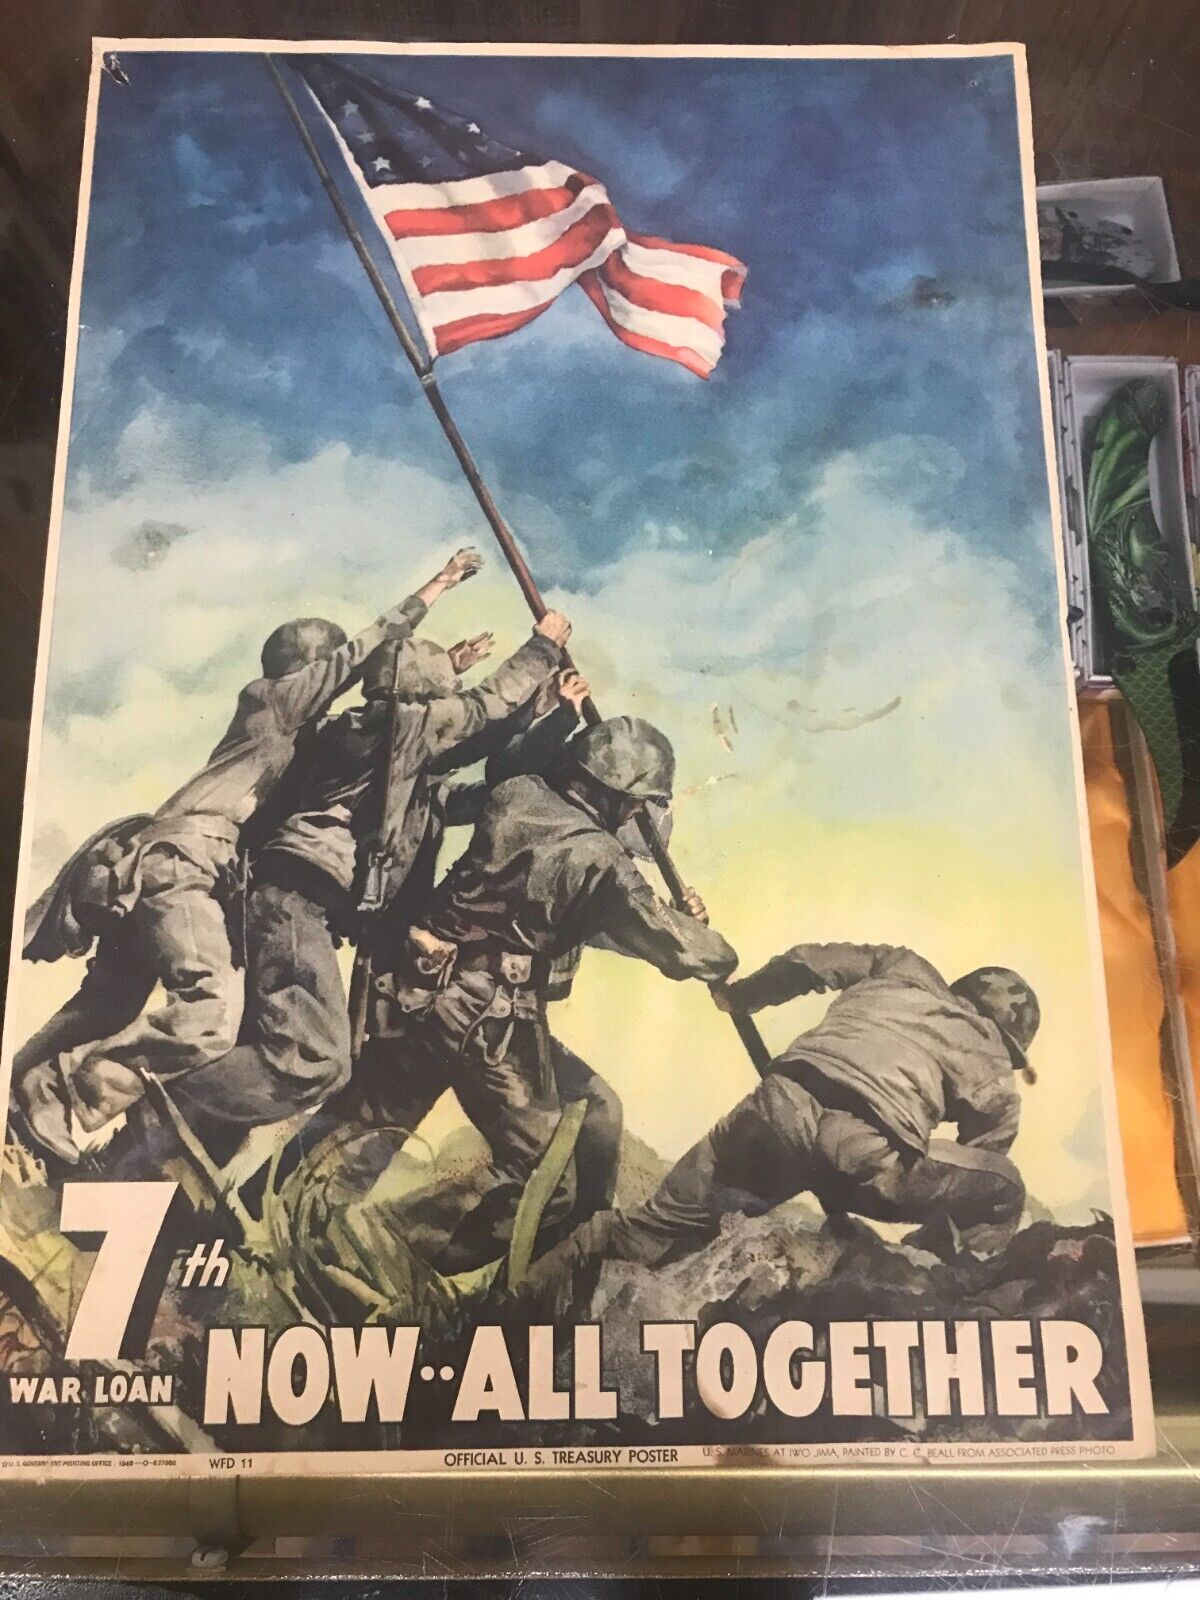 Original WWII Propaganda Poster 7th War Loan Now All Together CC Beall Soiling